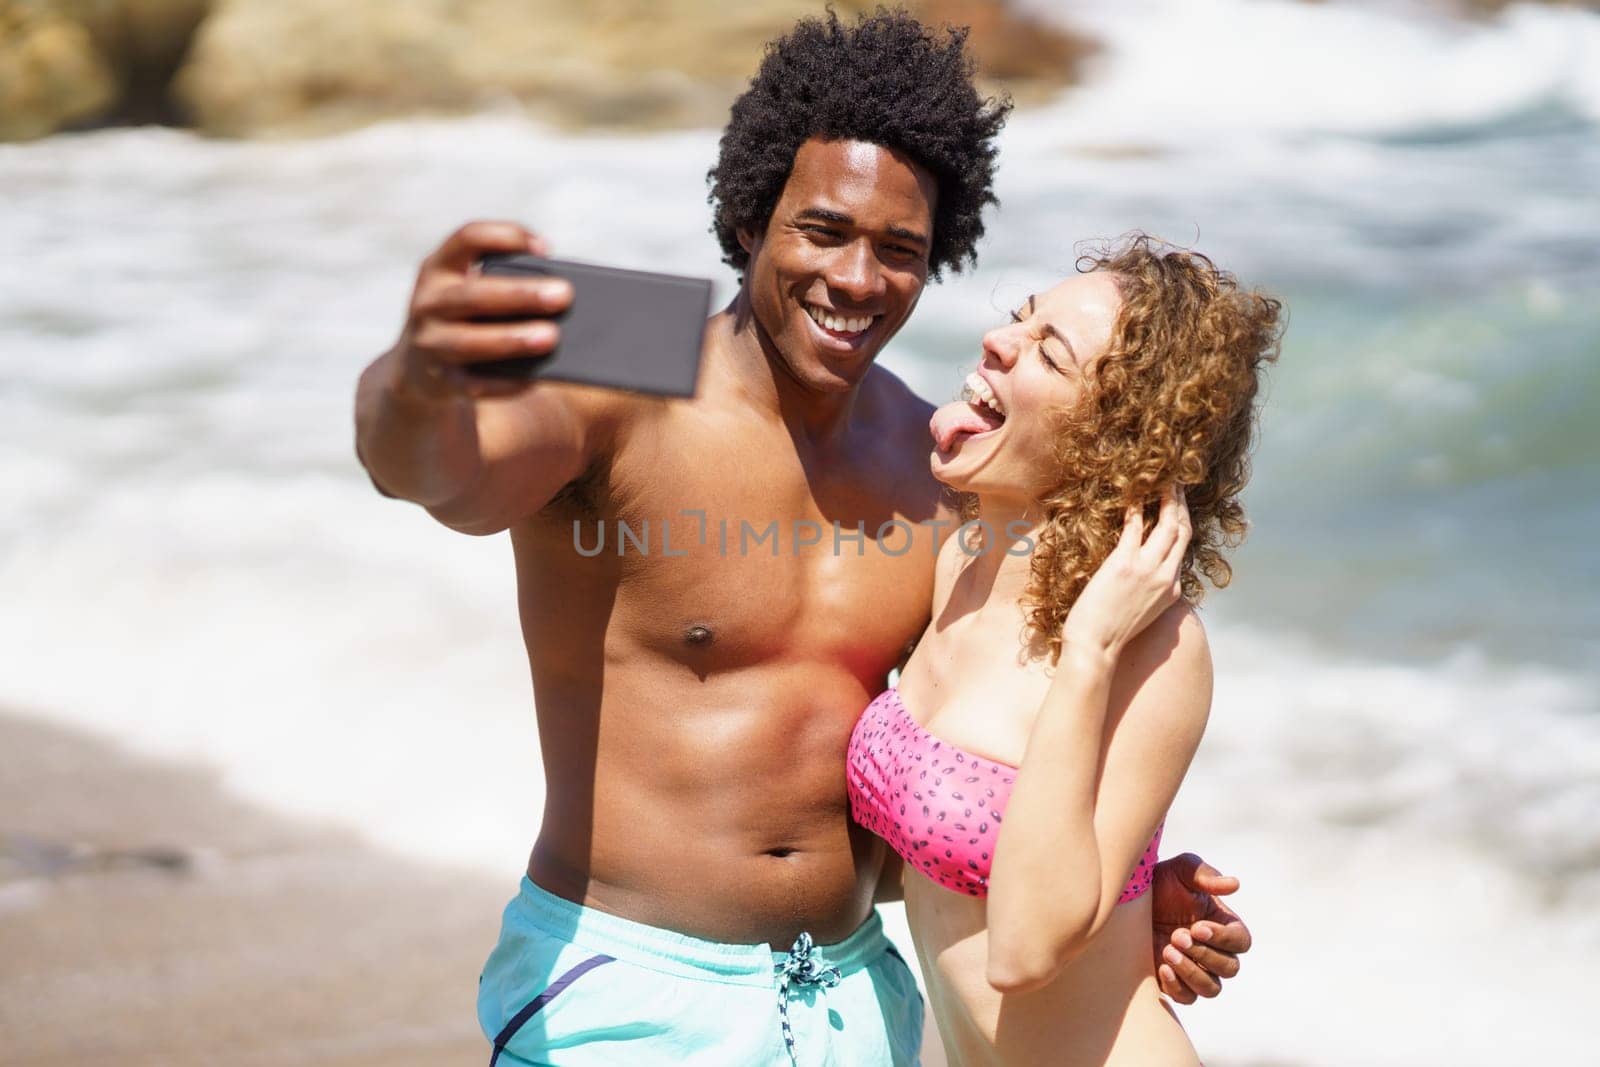 Happy African American man with naked torso and curly hair taking selfie on cellphone with girlfriend showing tongue against waving sea